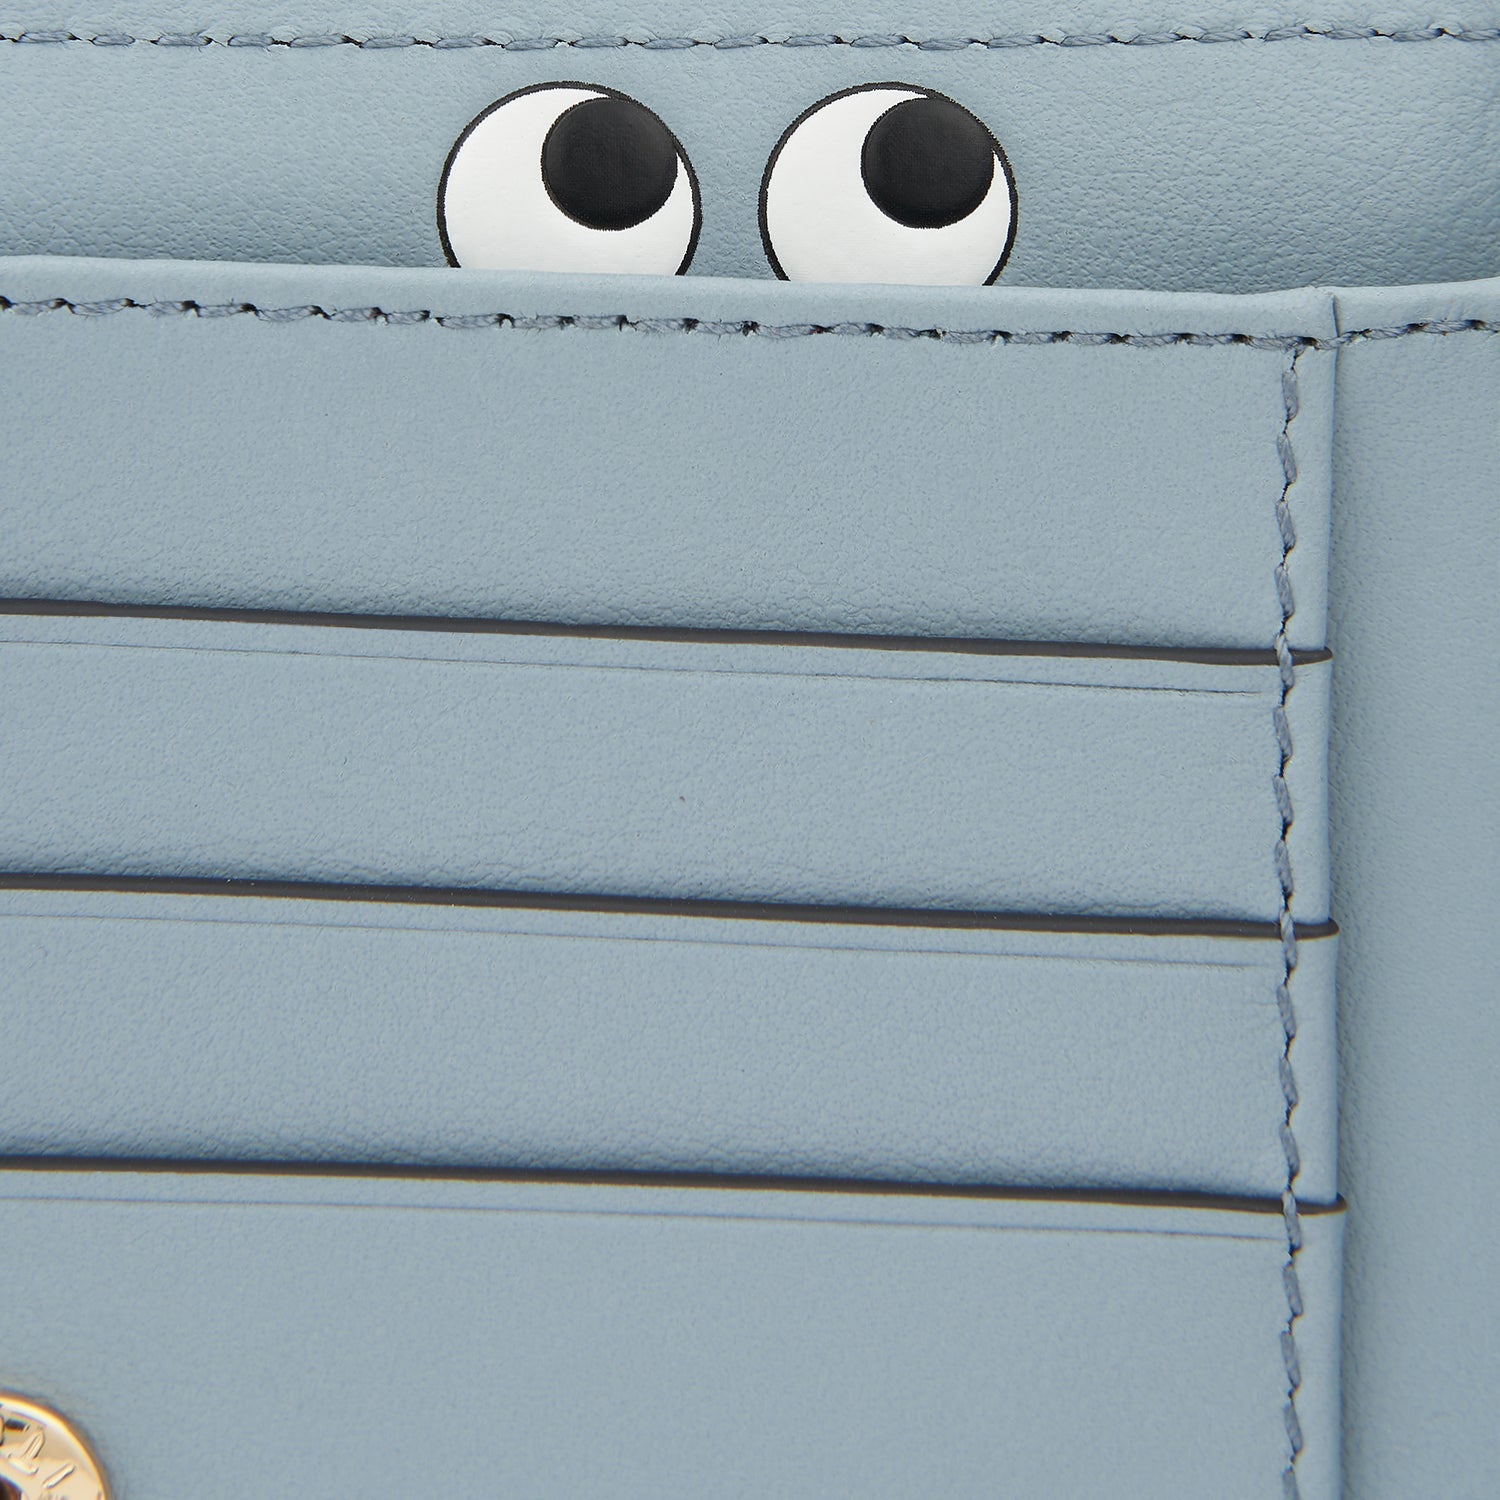 Peeping Eyes Small Double Zip Wallet -

                  
                    Capra Leather in Rosewood -
                  

                  Anya Hindmarch US
